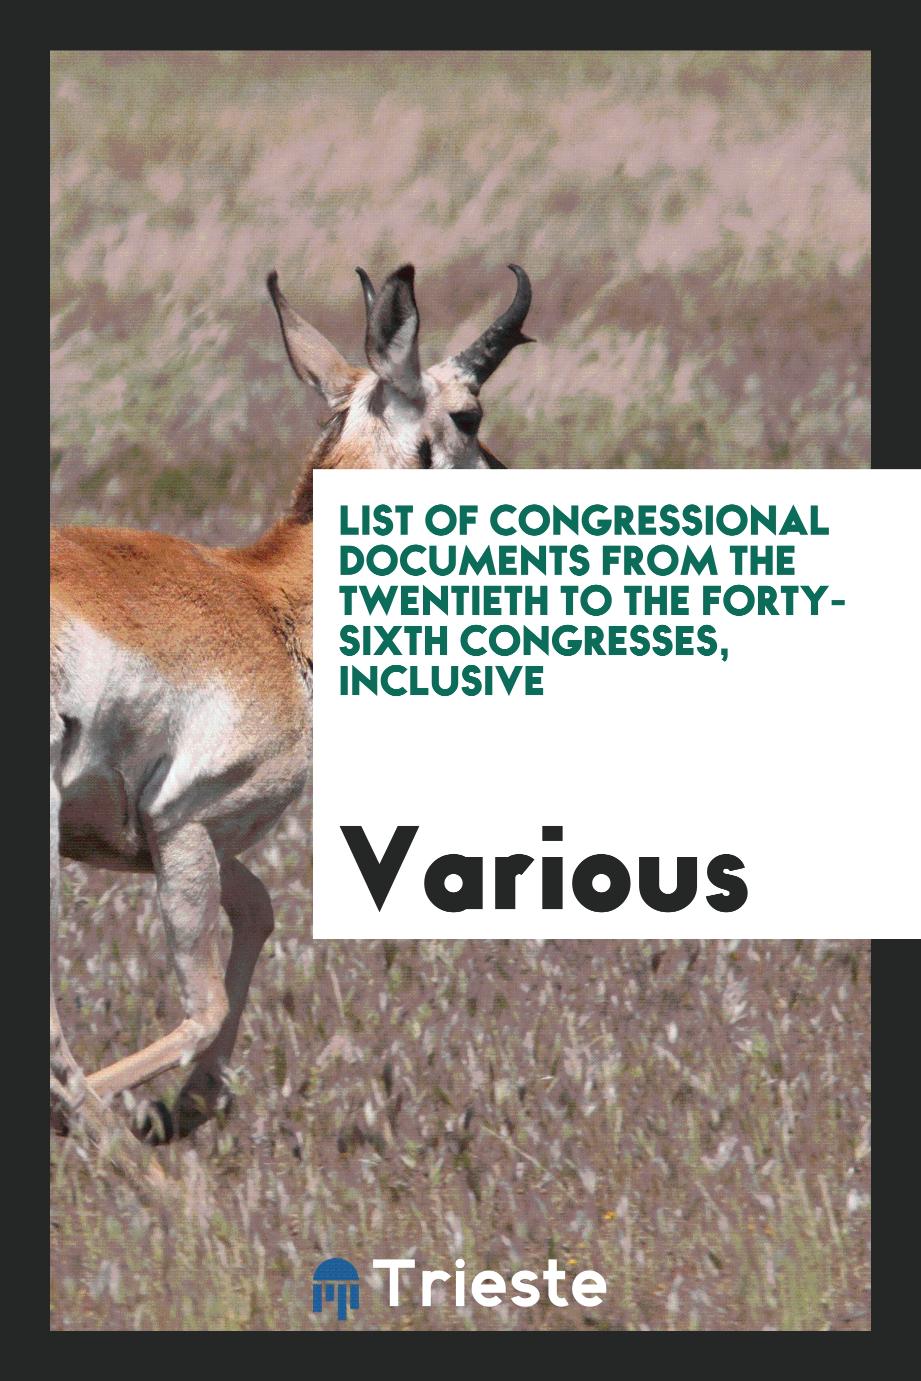 List of Congressional Documents from the Twentieth to the Forty-sixth congresses, inclusive